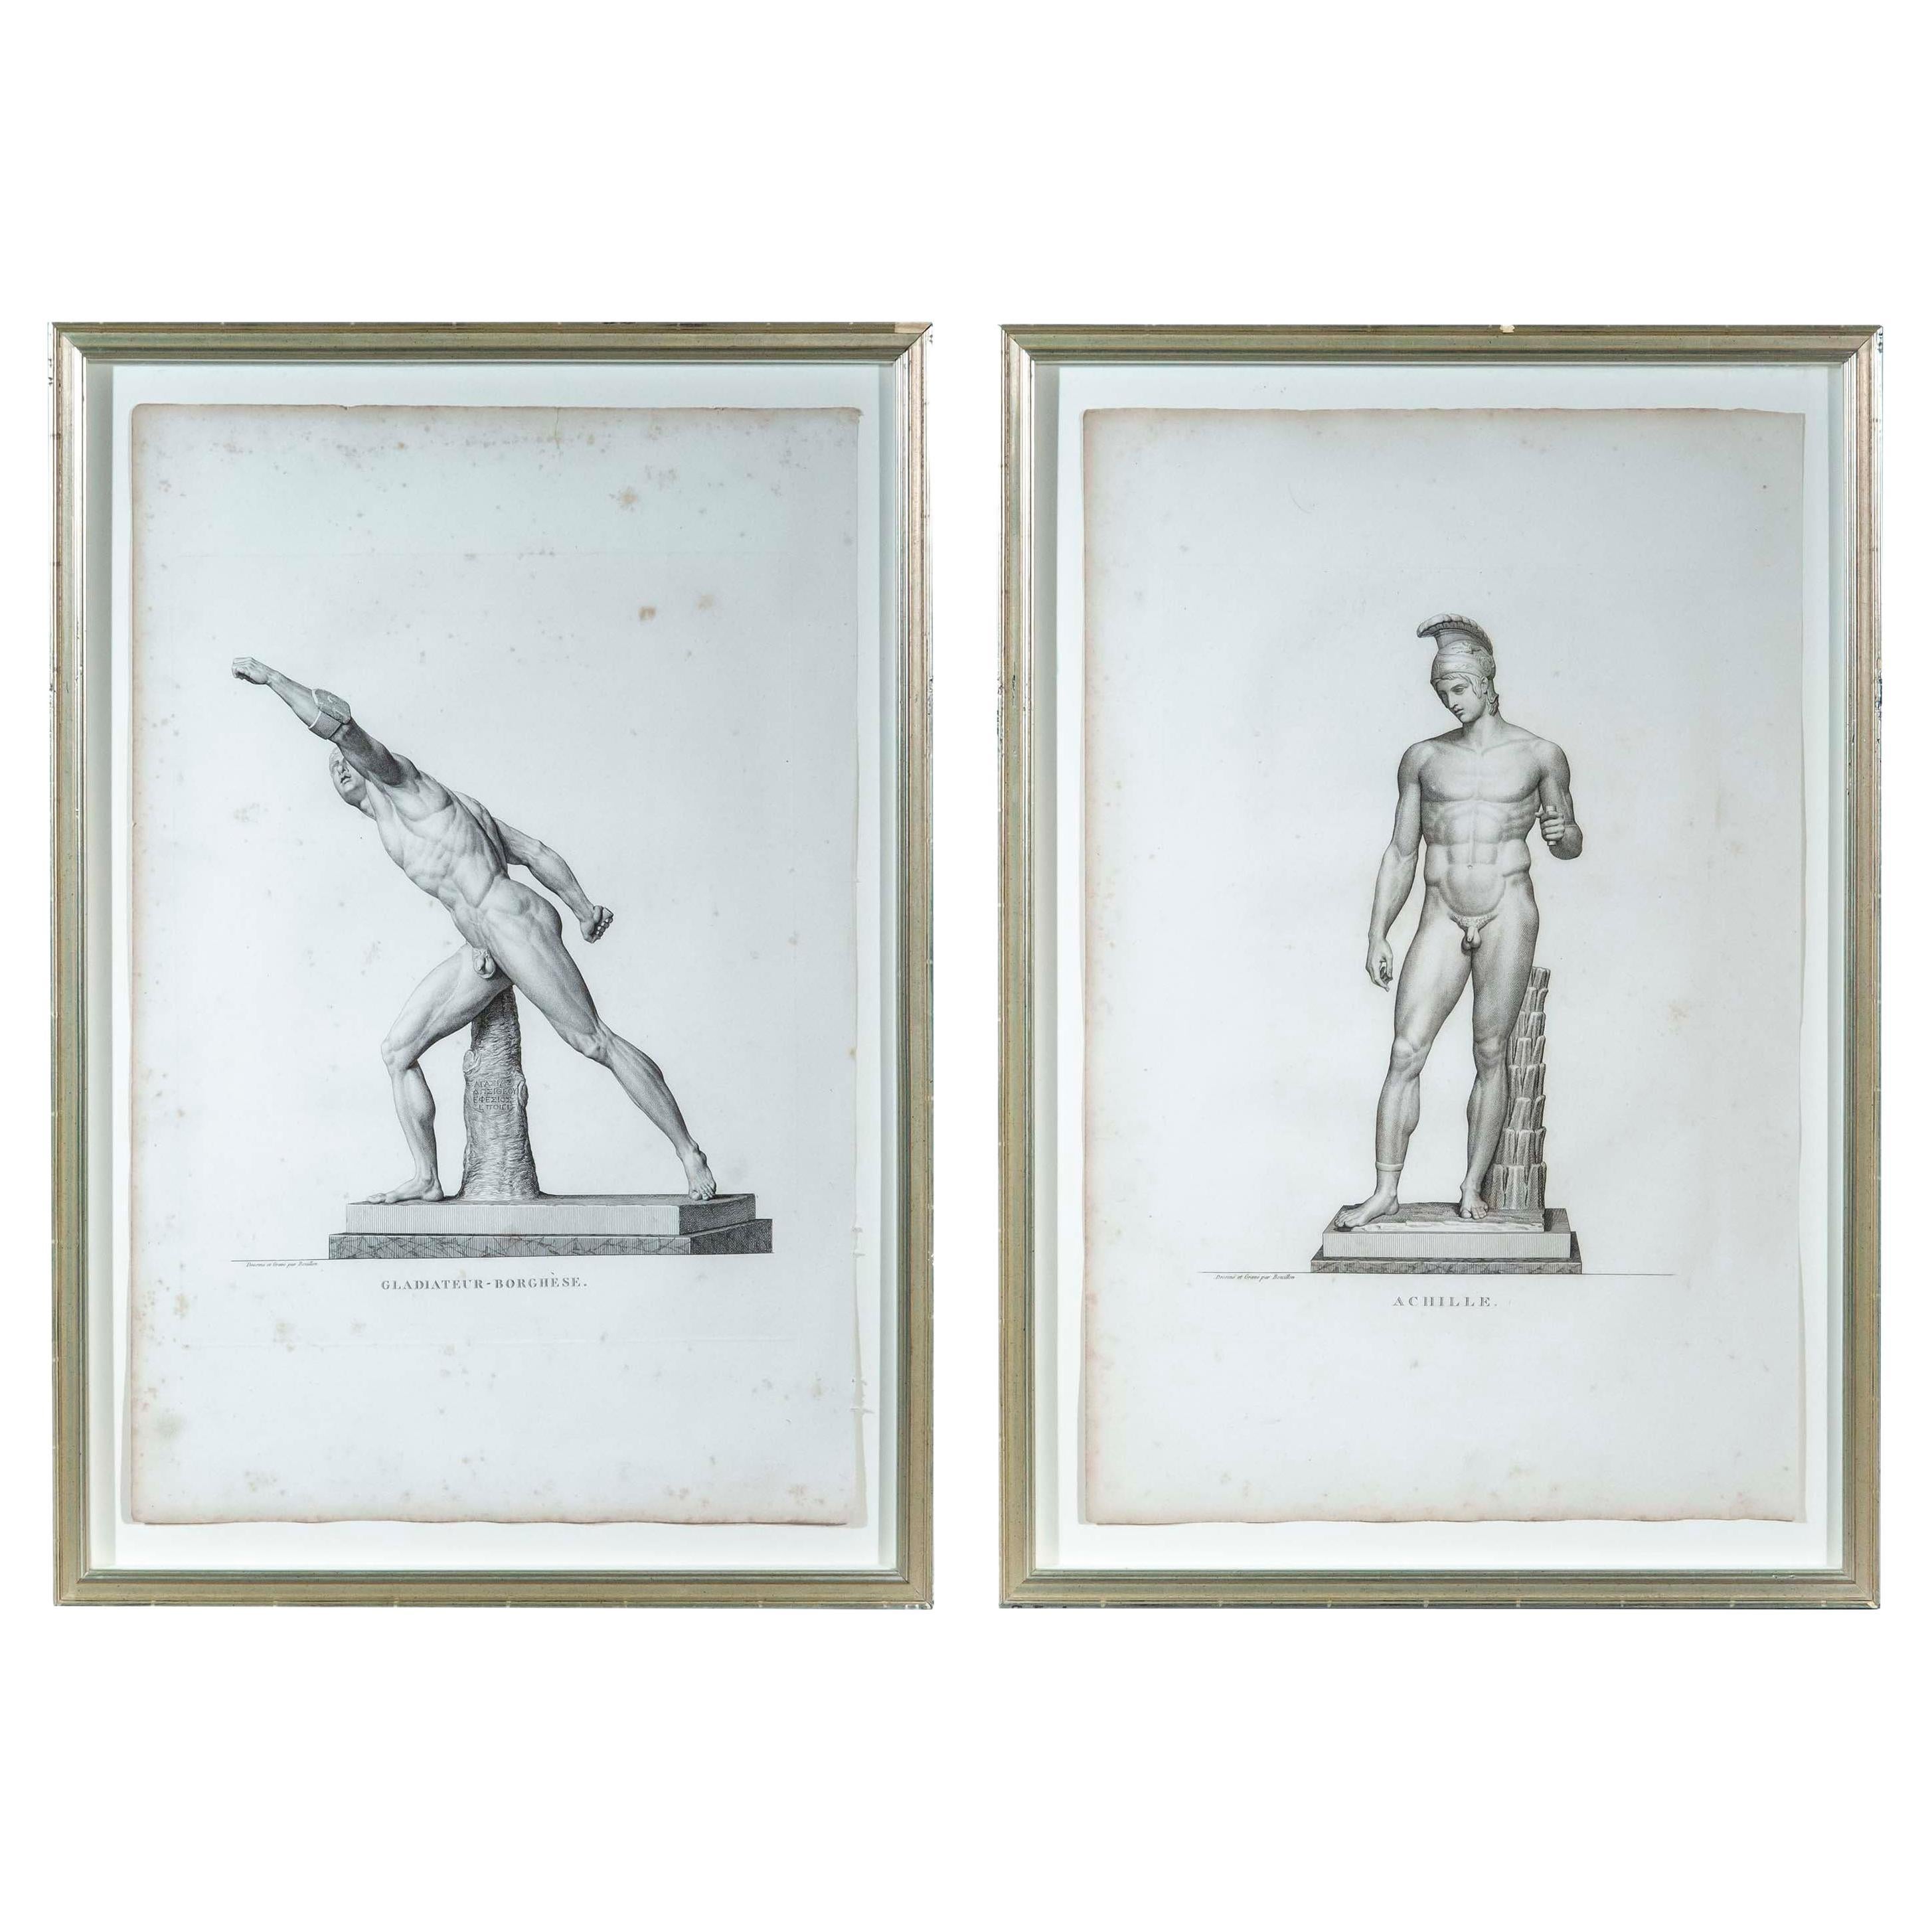 Two Grand Tour Engravings of Ancient Greek Sculptures